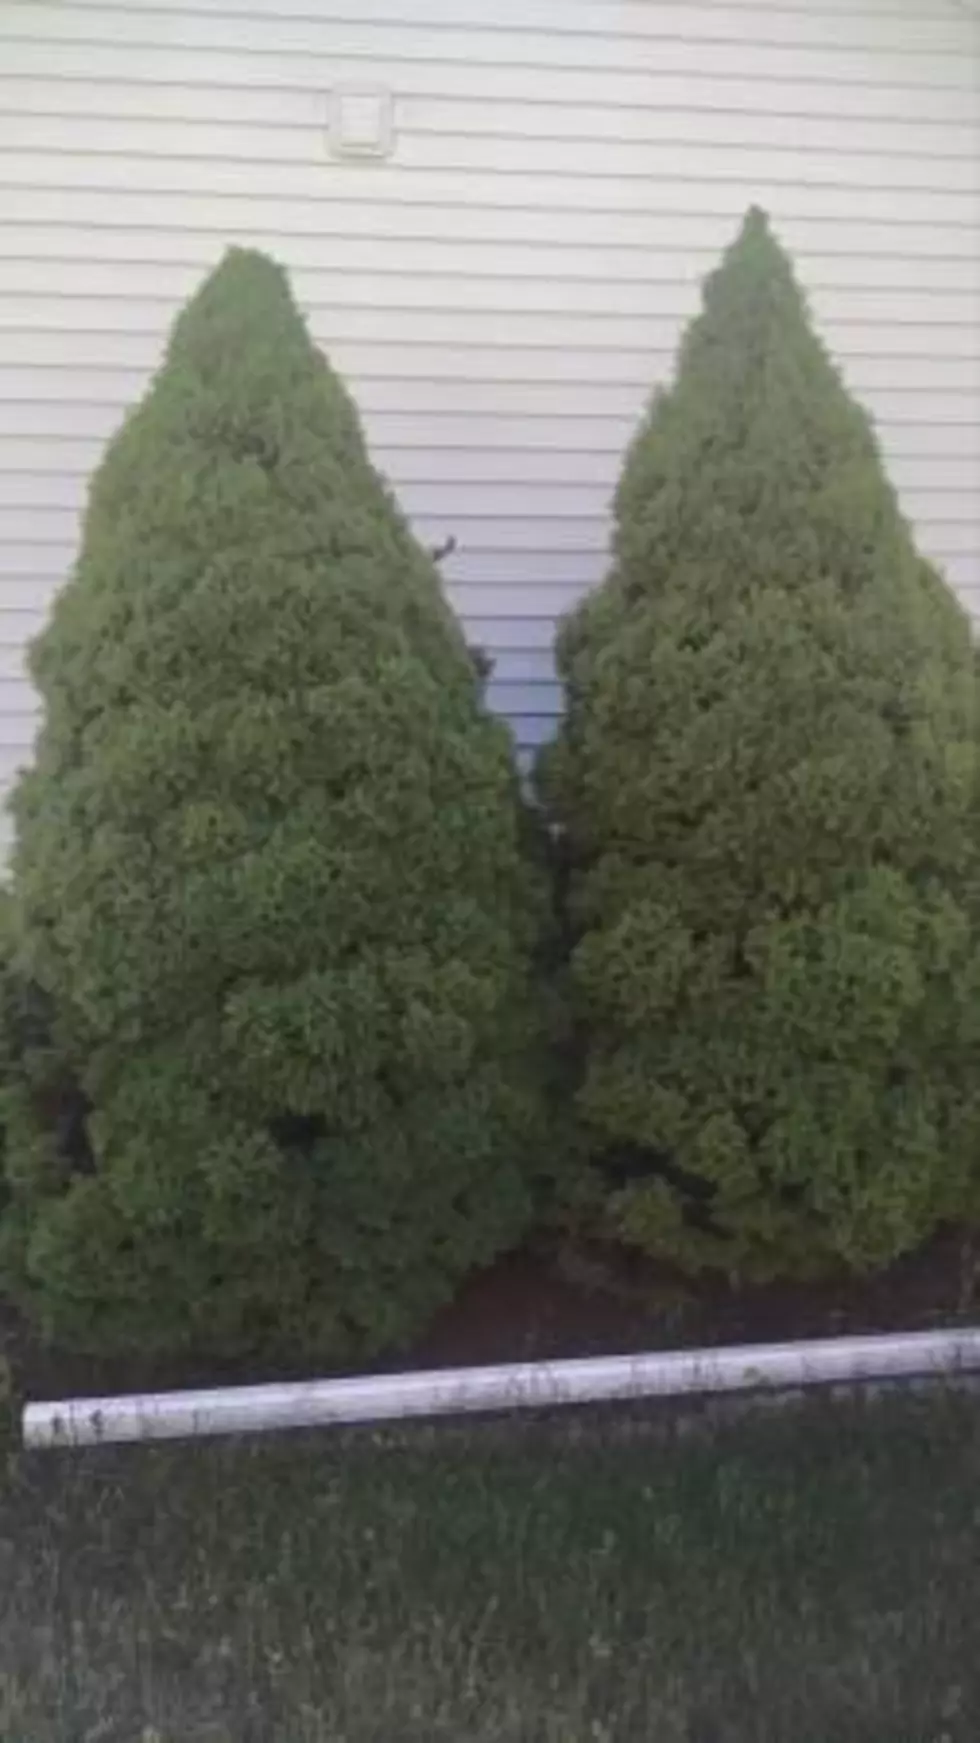 Whoa! You Can HAVE THESE TREES in Holt for FREE!